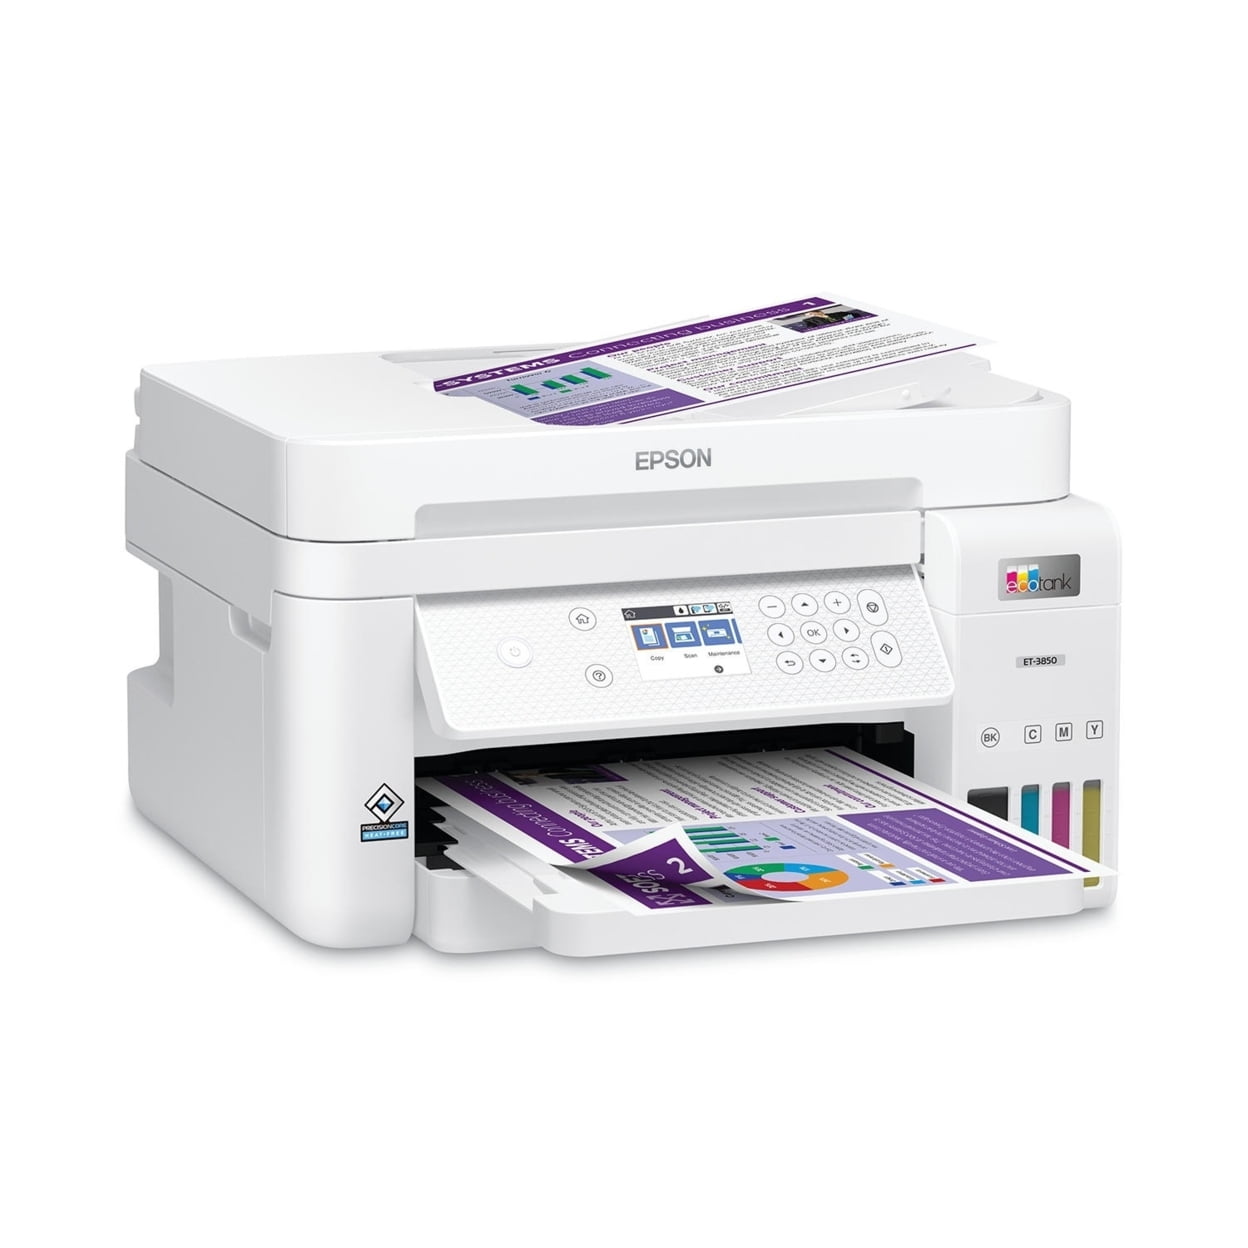 Epson EcoTank-3850 Special Edition All-in-One Printer with Bonus Black Ink  